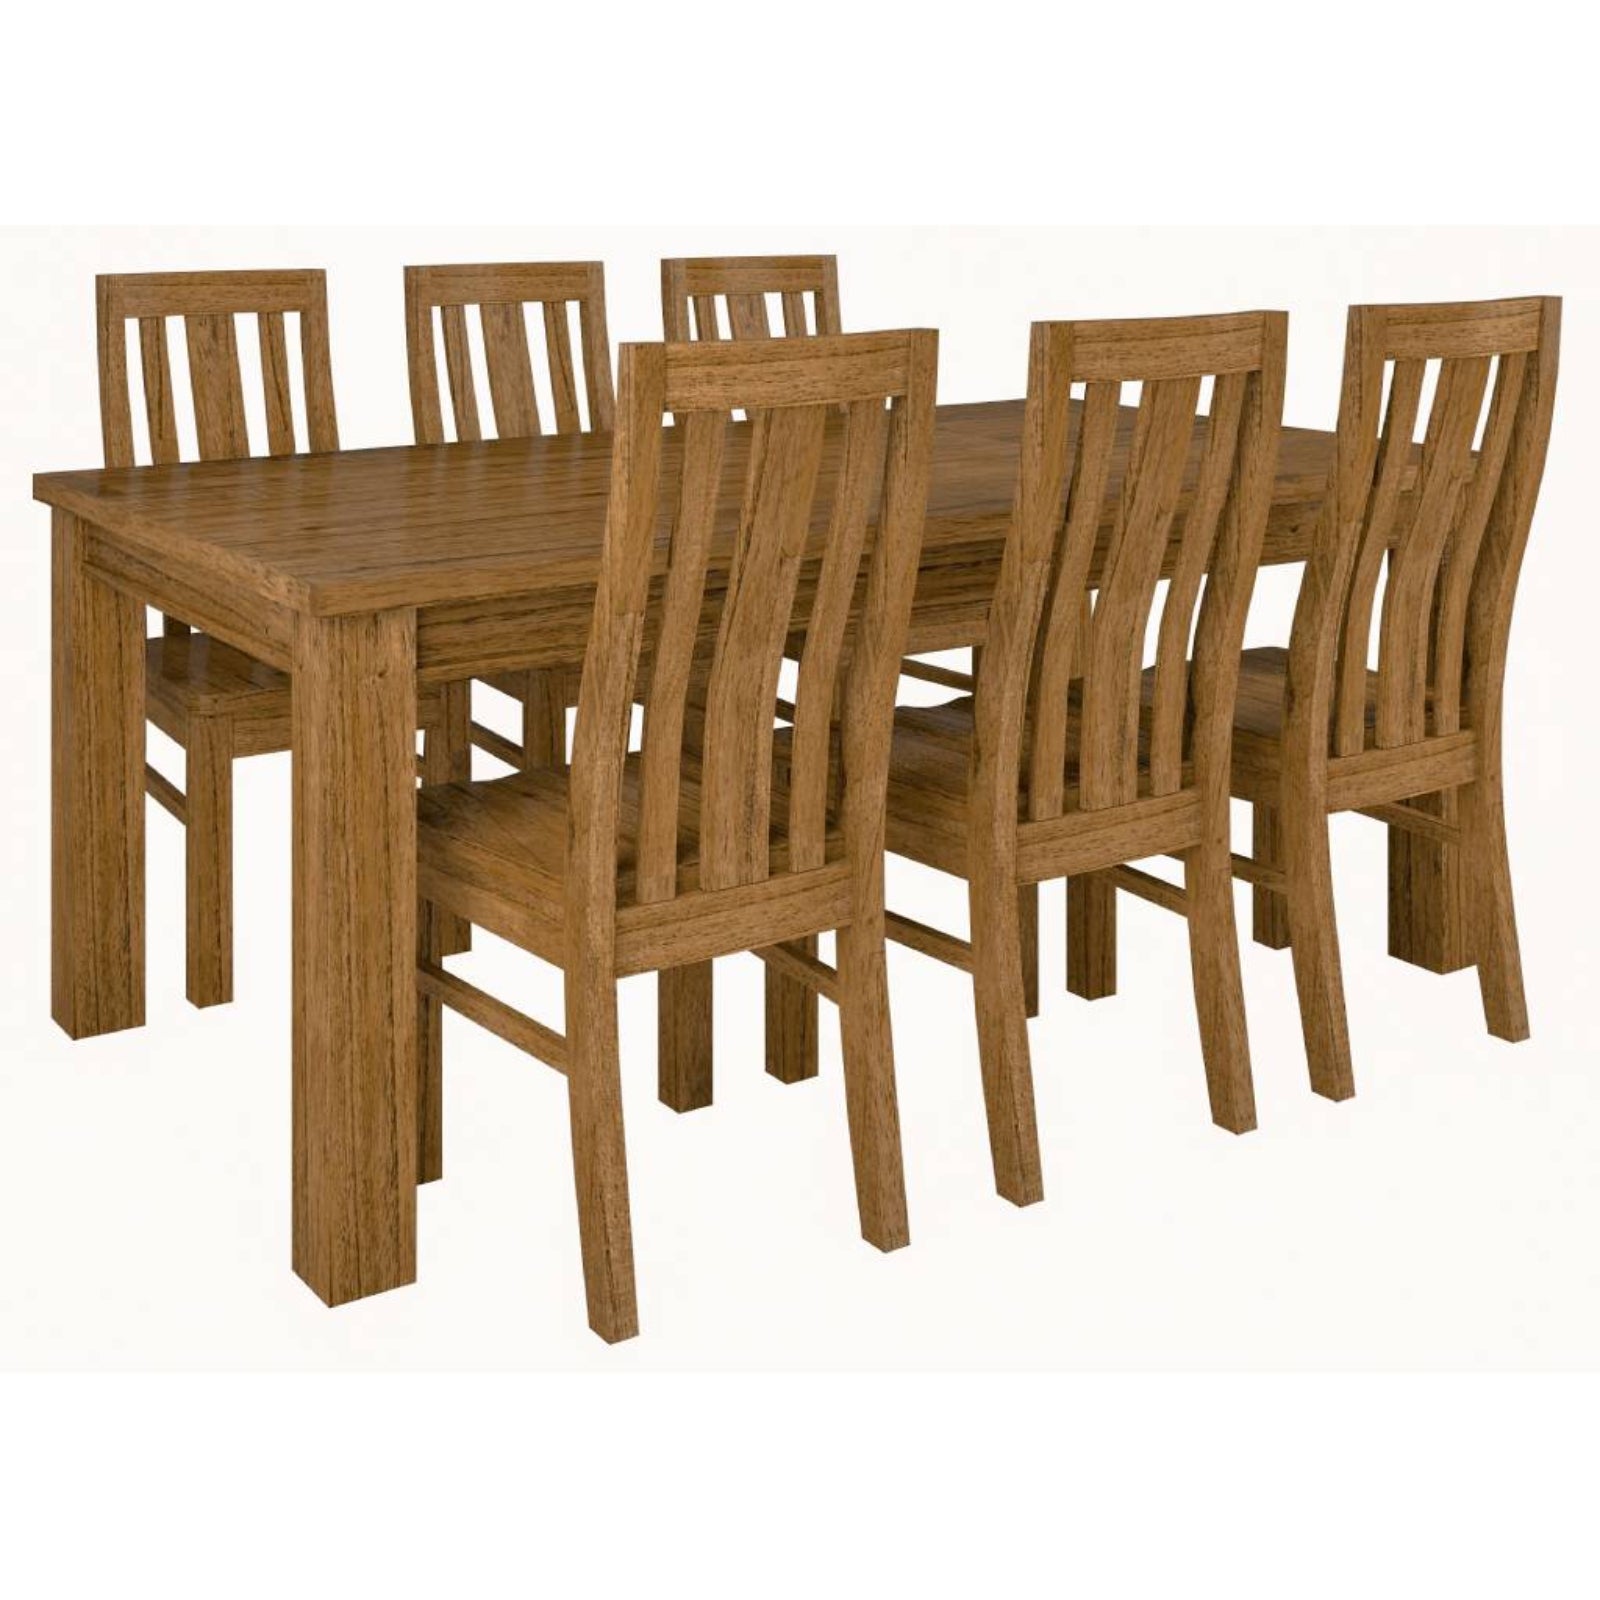 Birdsville 7pc Dining Set 190cm Table 6 Chair Solid Mt Ash Wood Timber - Brown - SILBERSHELL